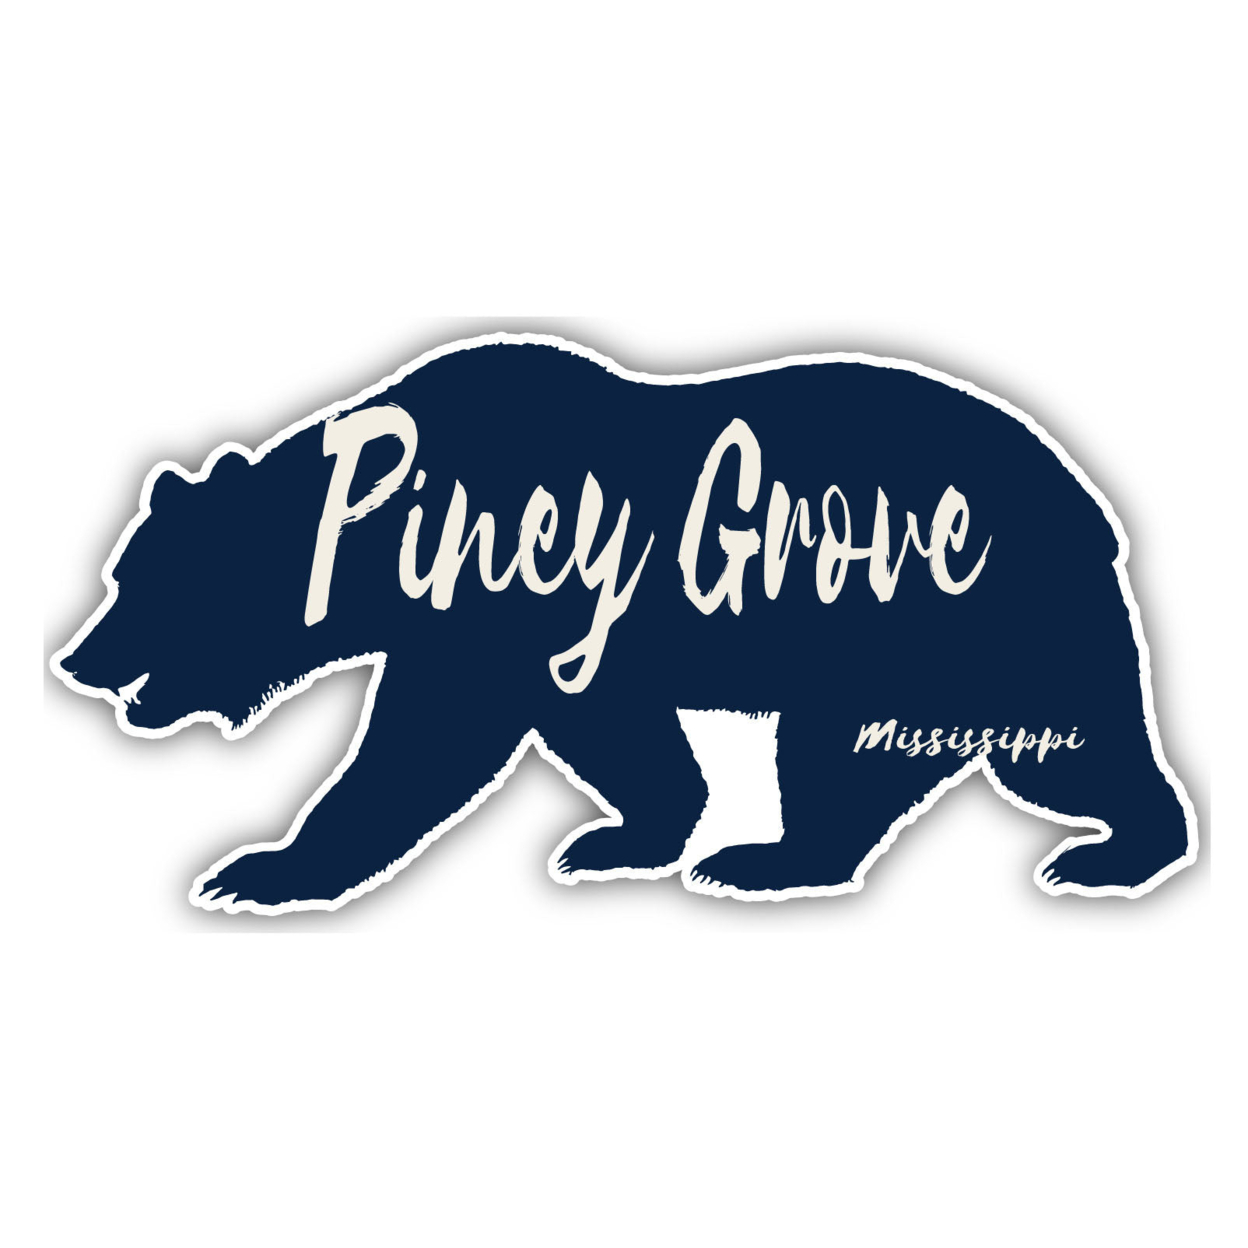 Piney Grove Mississippi Souvenir Decorative Stickers (Choose Theme And Size) - Single Unit, 2-Inch, Bear